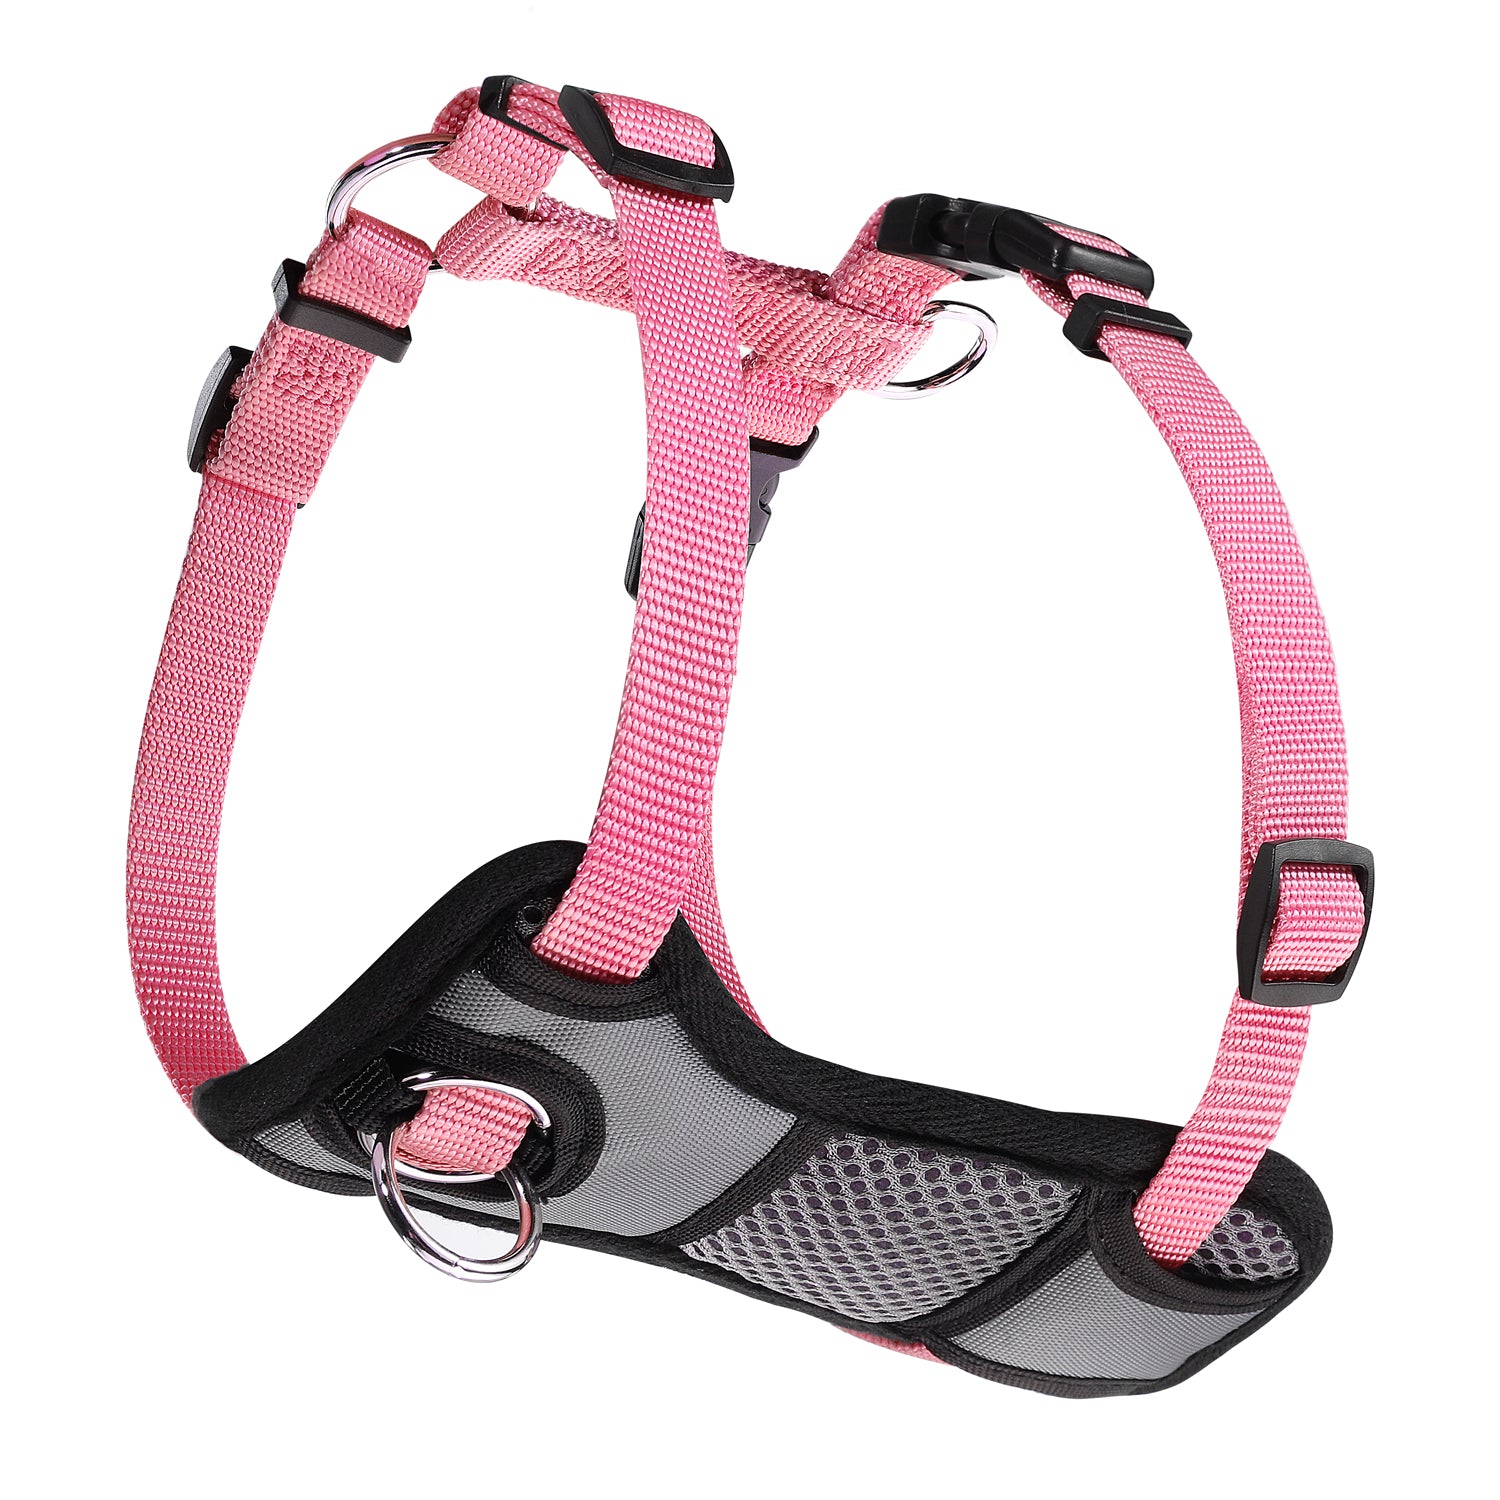 JESPET Dog Harness No Pull with Adjustable Straps for Training, Pink